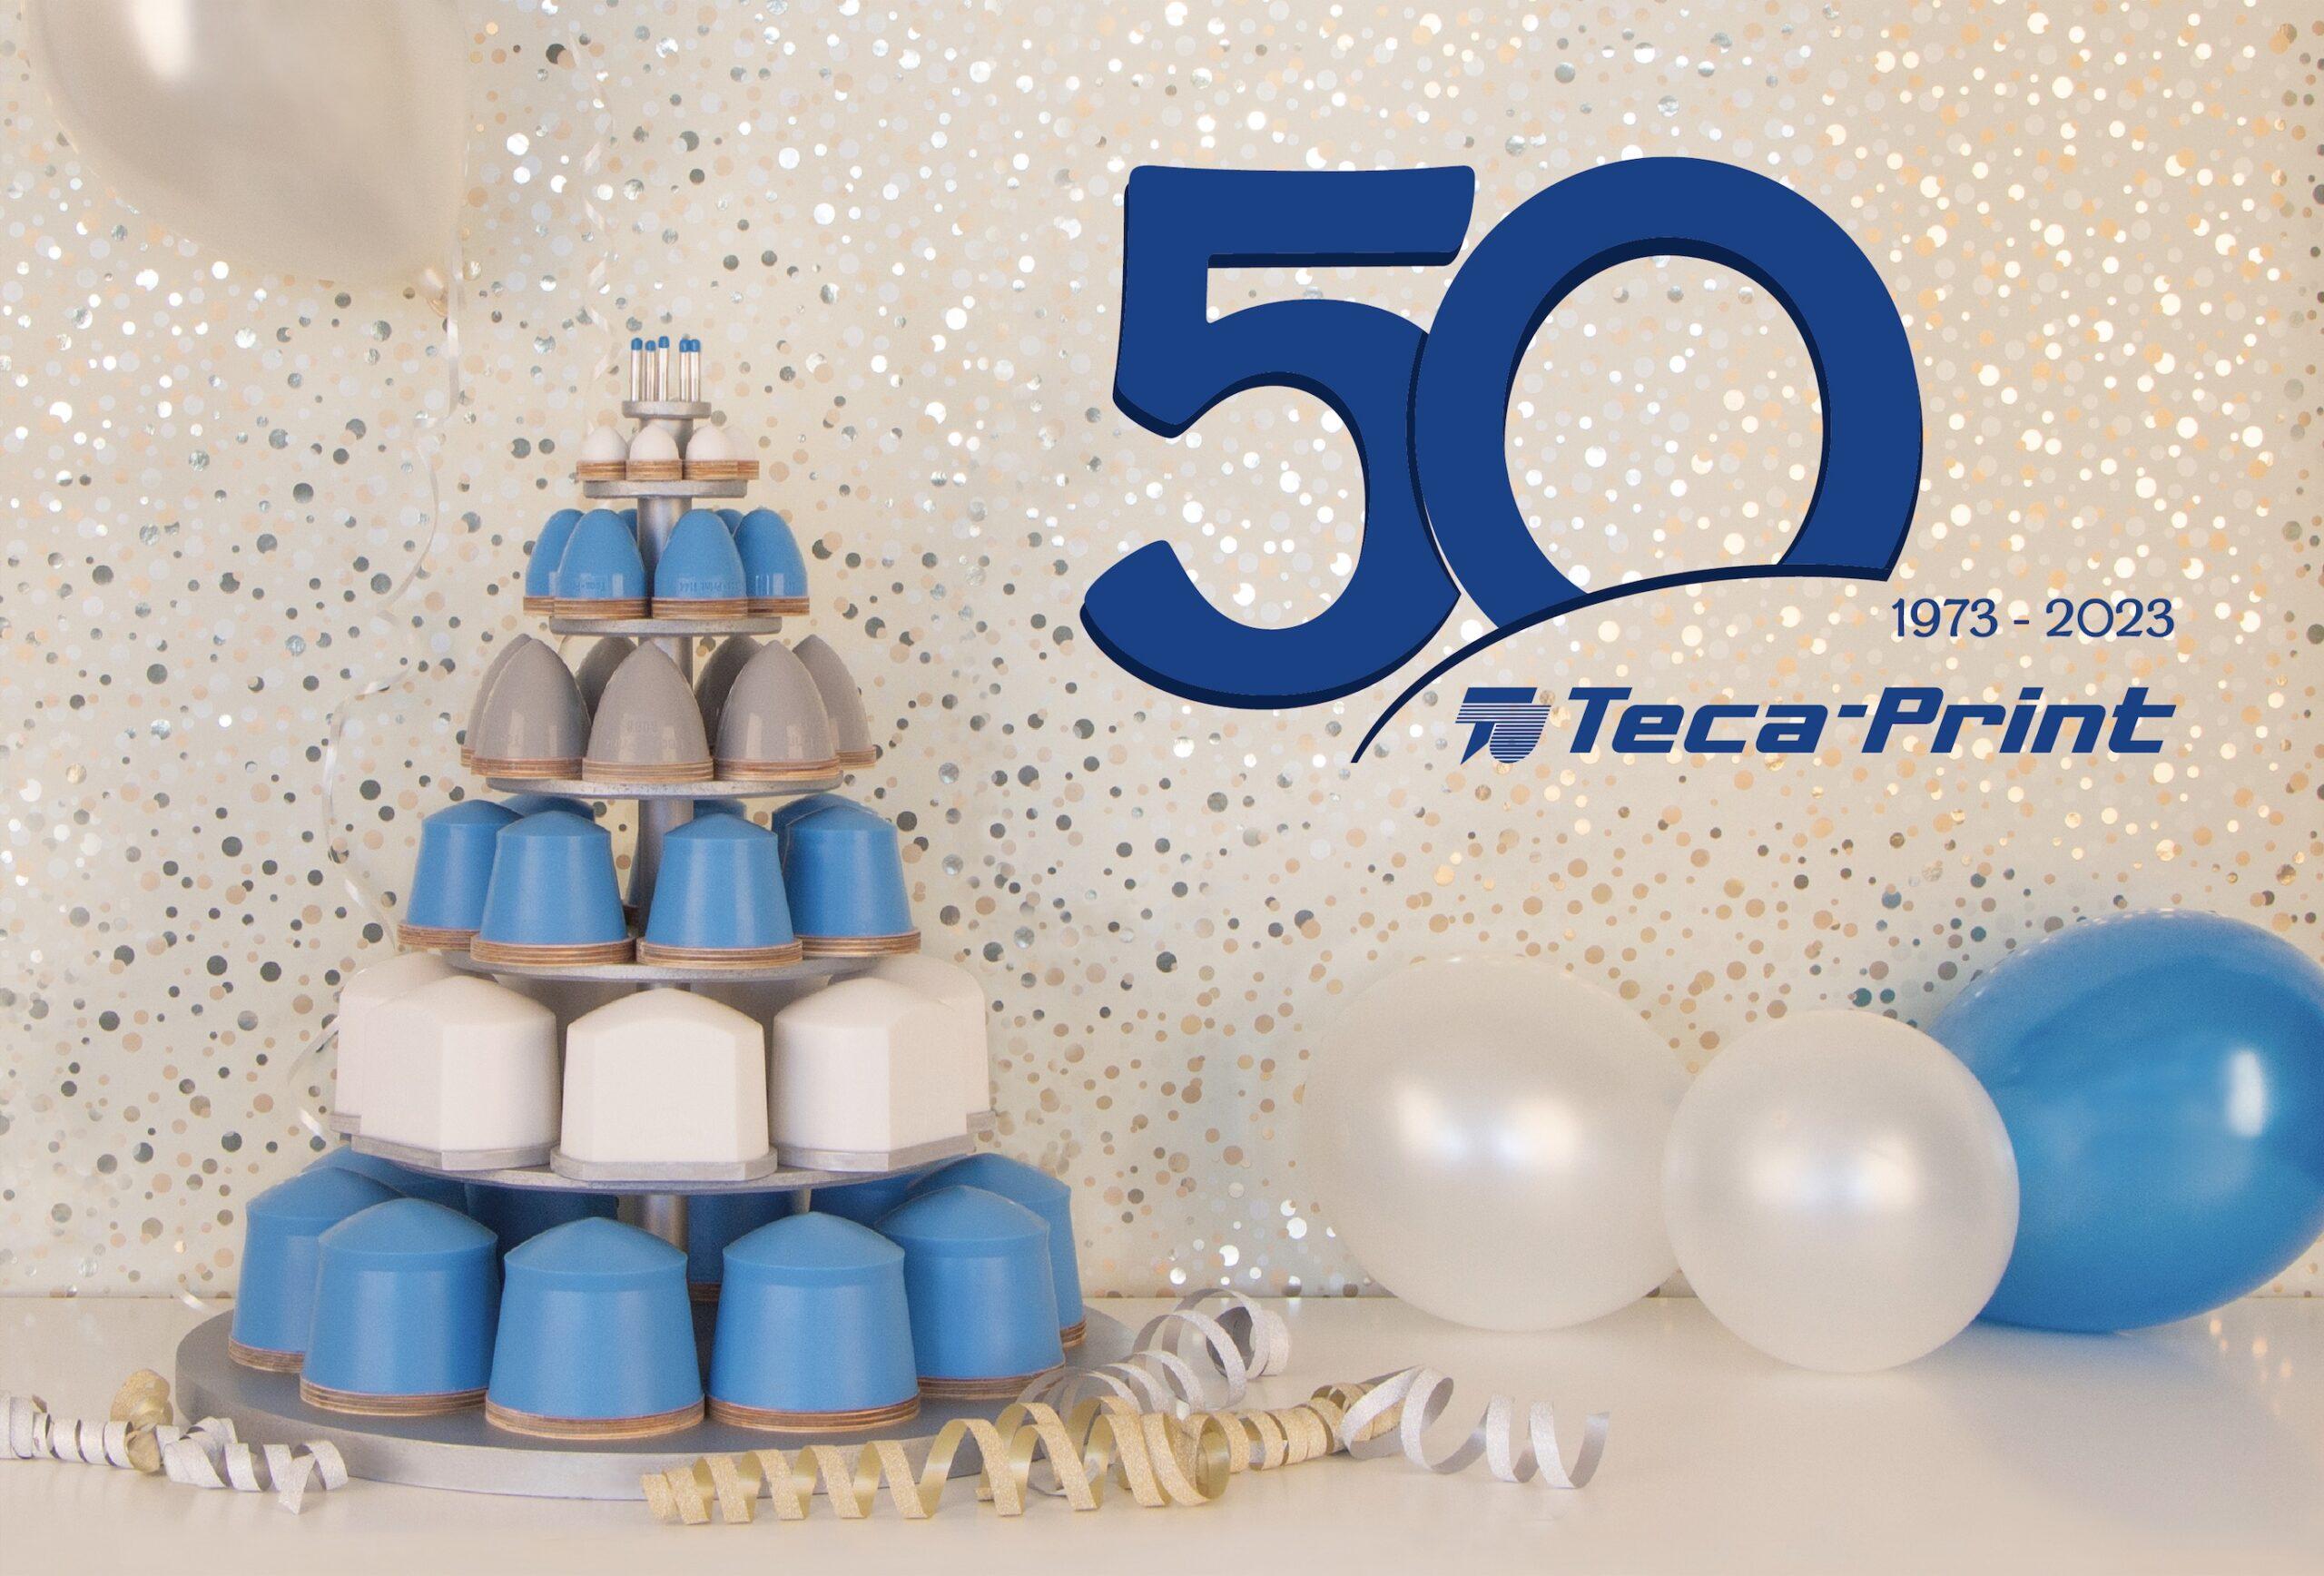 Celebrate 50 years of Teca-Print with us